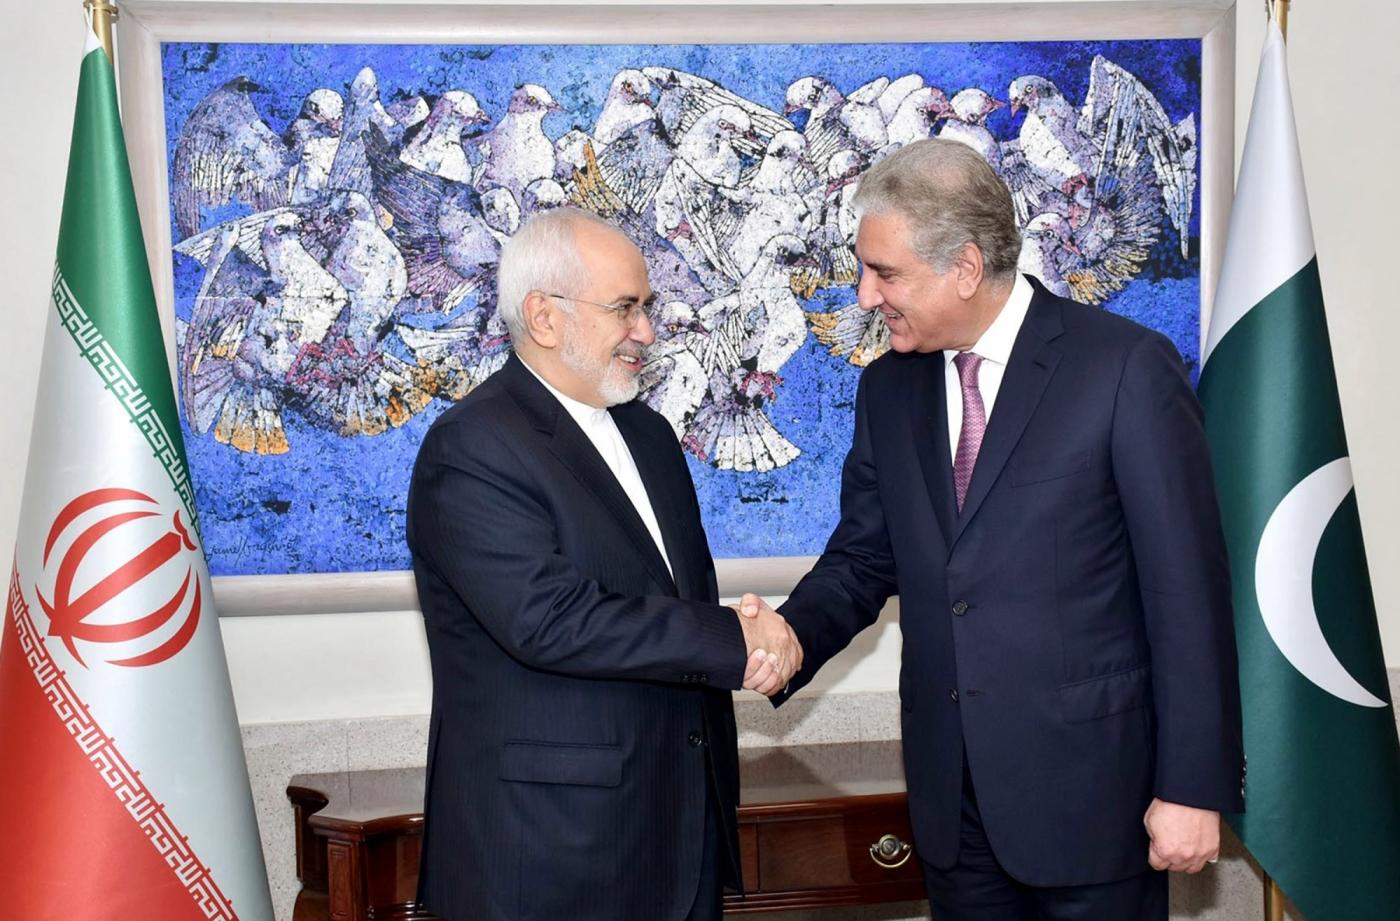 ISLAMABAD, Aug. 31, 2018 (Xinhua) -- Photo released by Pakistan's Press Information Department (PID) on Aug. 31, 2018 shows that Pakistani Foreign Minister Shah Mahmood Qureshi (R) shakes hand with his Iranian counterpart Mohammad Javad Zarif in Islamabad, capital of Pakistan. Pakistan on Friday expressed its support to Iran on the international nuclear deal related to the Iranian nuclear issue during talks between foreign ministers of the two countries, the Foreign Ministry said. (Xinhua/PID/IANS) by .